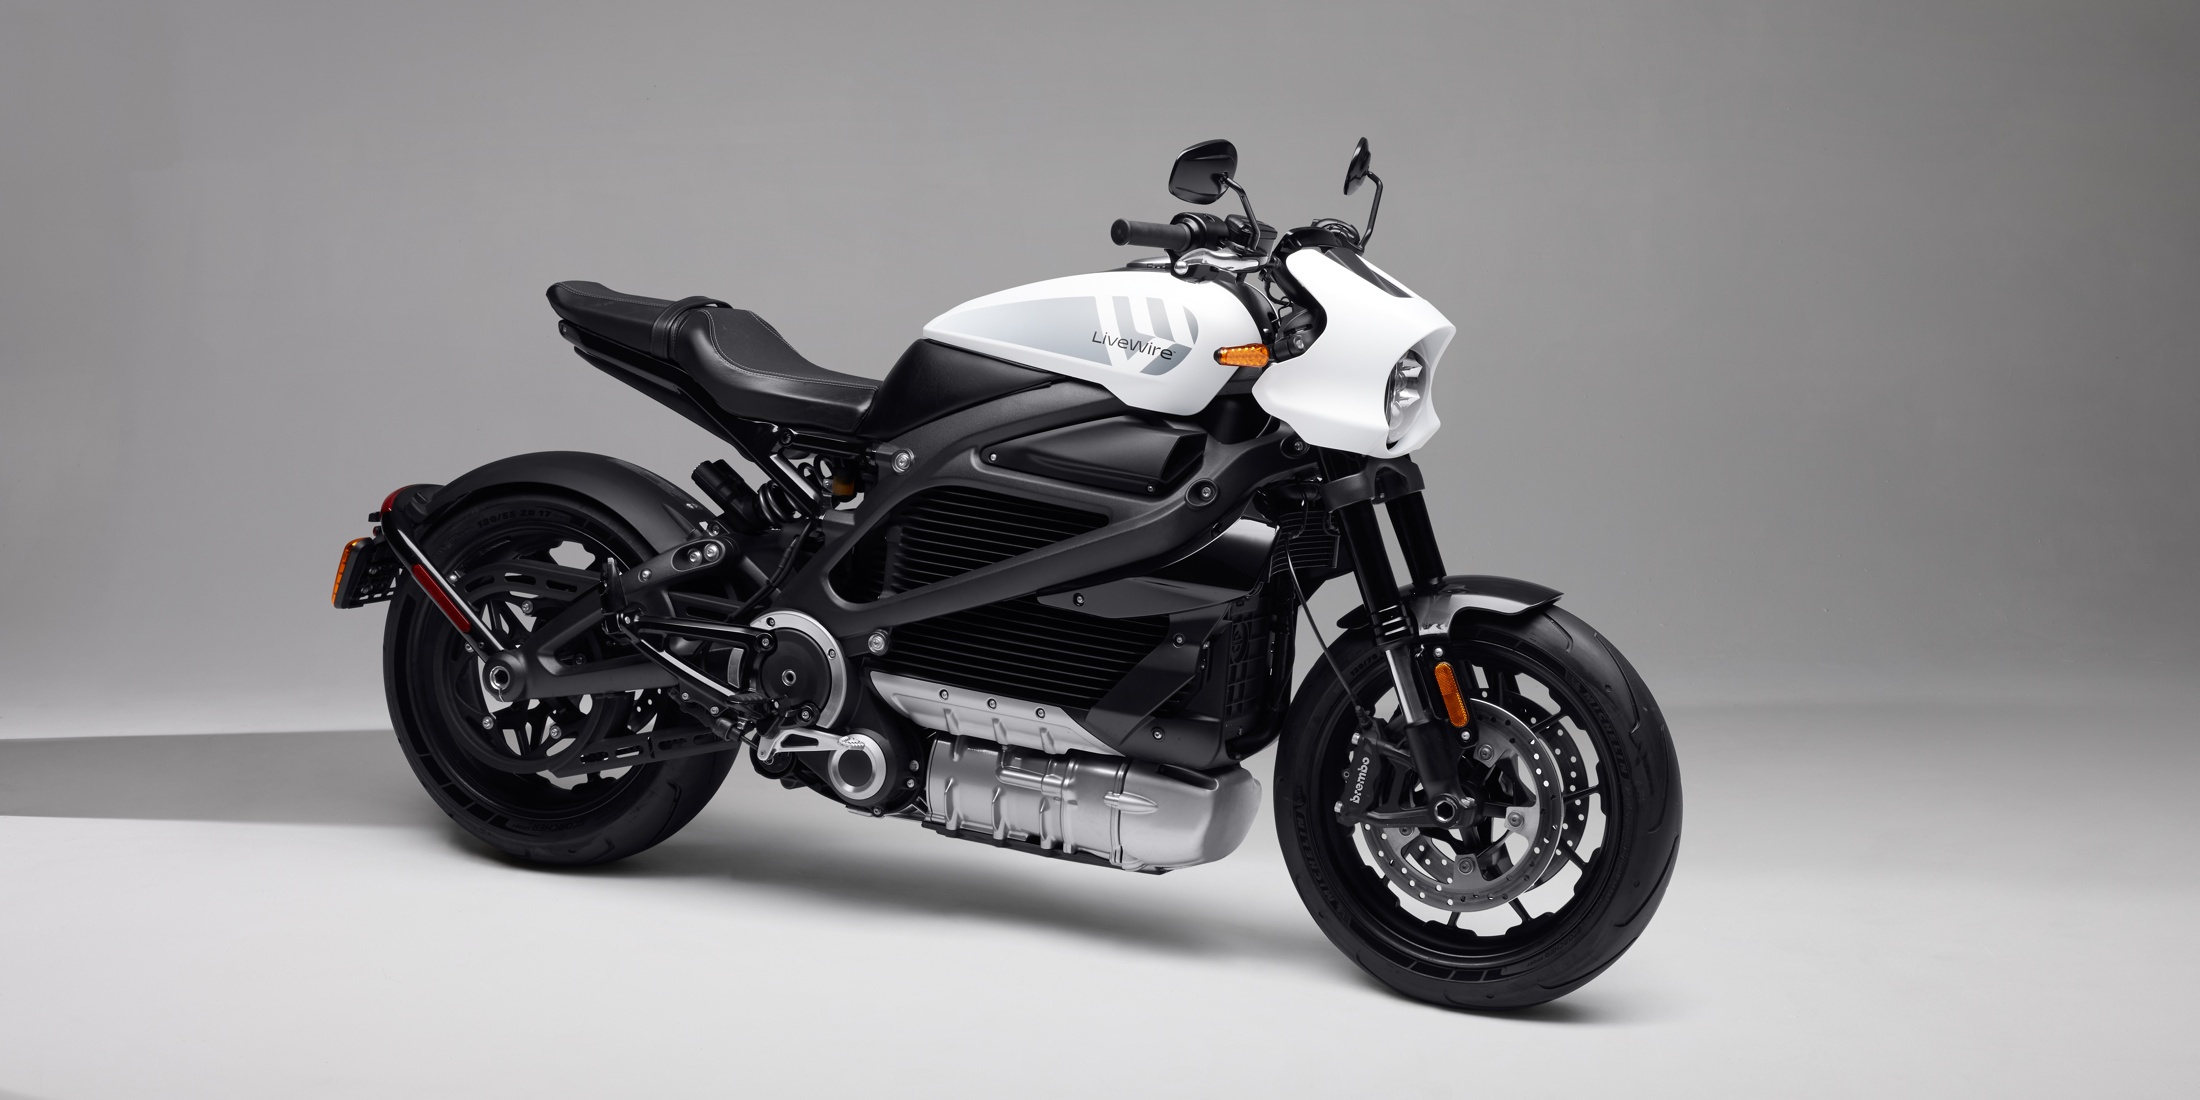 Harley-Davidson LiveWire electric motorcycle review: The real deal